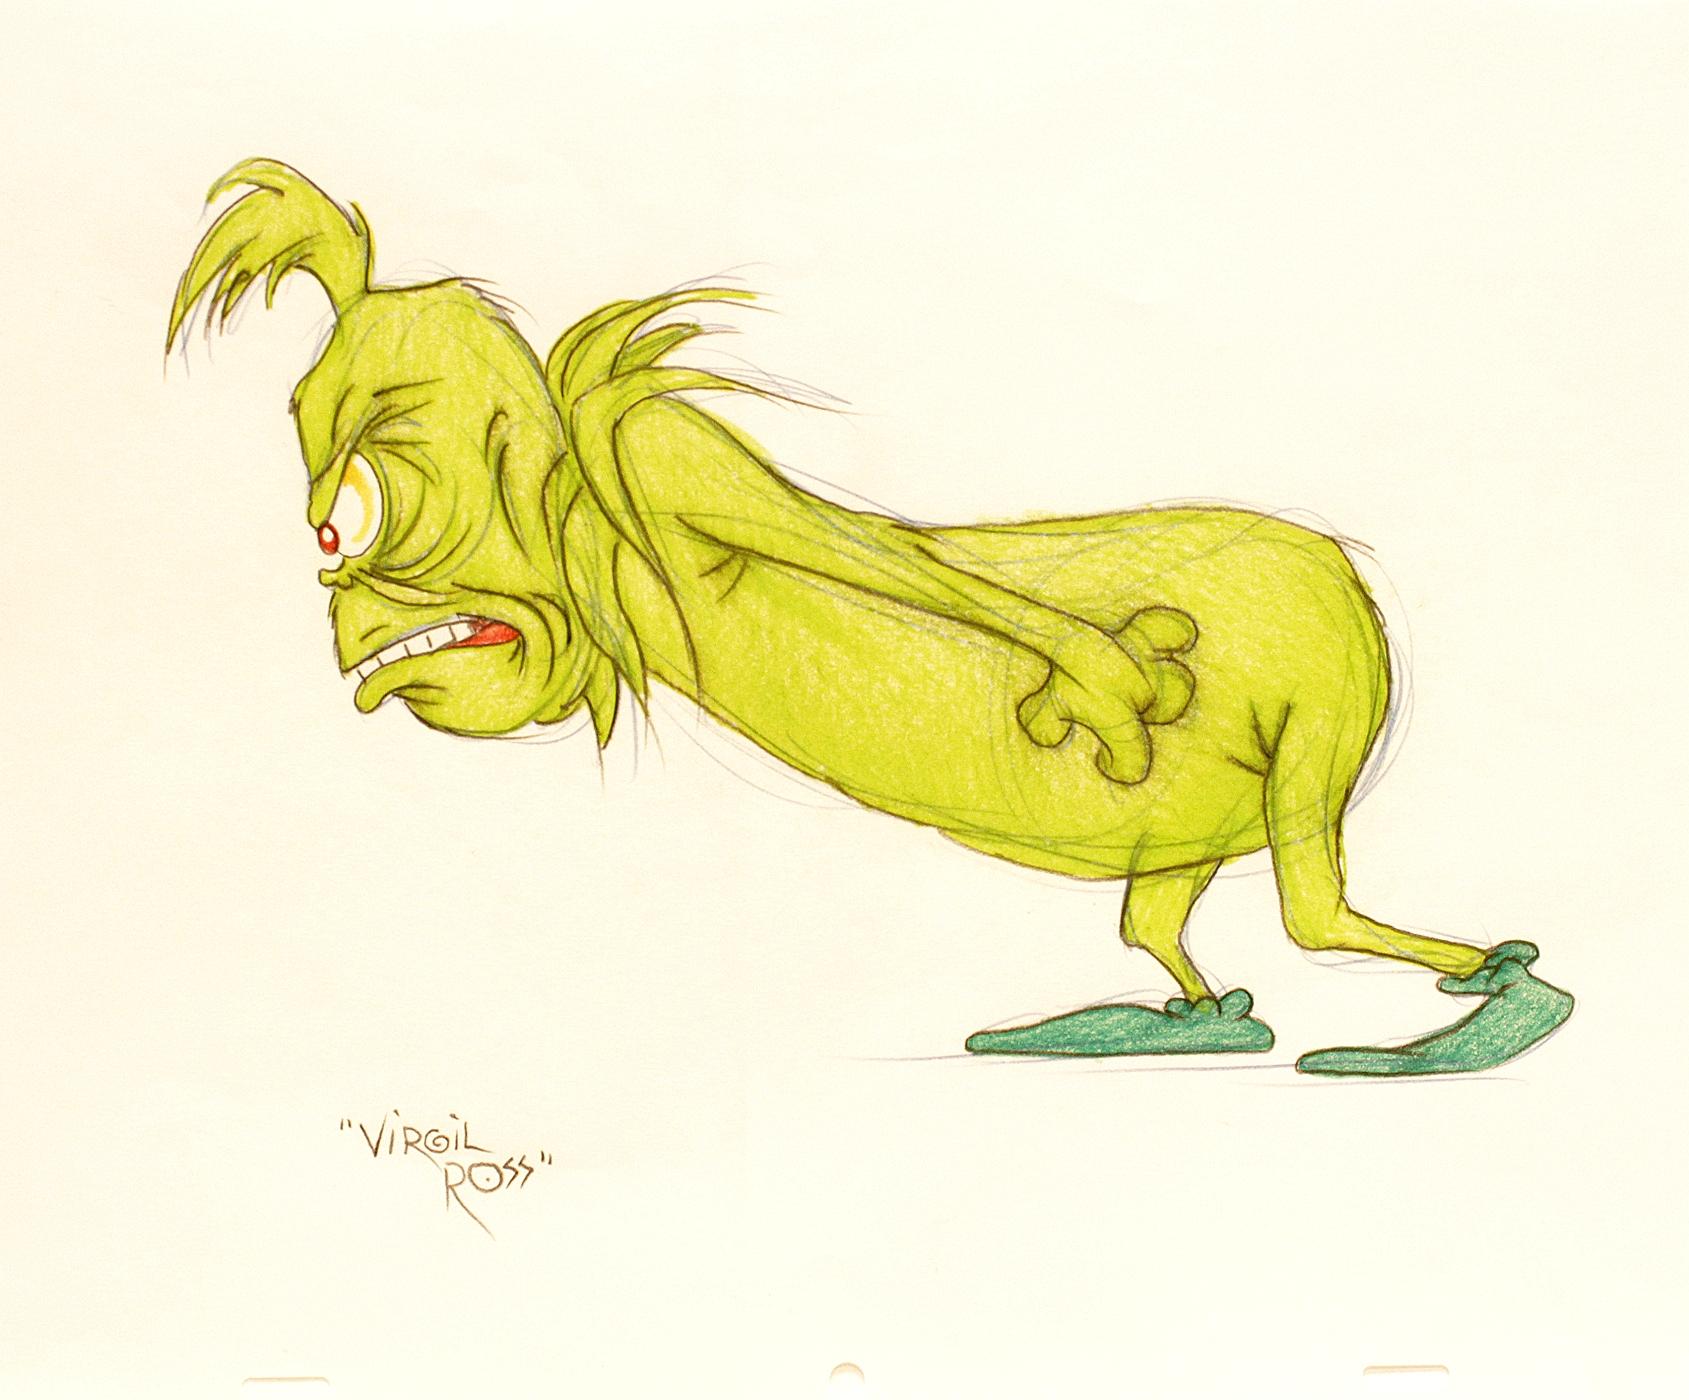 AUTHOR: GEISEL, Theodore: (Dr. Seuss) ( Virgil Ross ). 

TITLE: How The Grinch Stole Christmas. (Original drawing)

PUBLISHER: Warner Brothers Studios, (c.1990's)

DESCRIPTION: ORIGINAL DRAWING OF THE GRINCH. 7